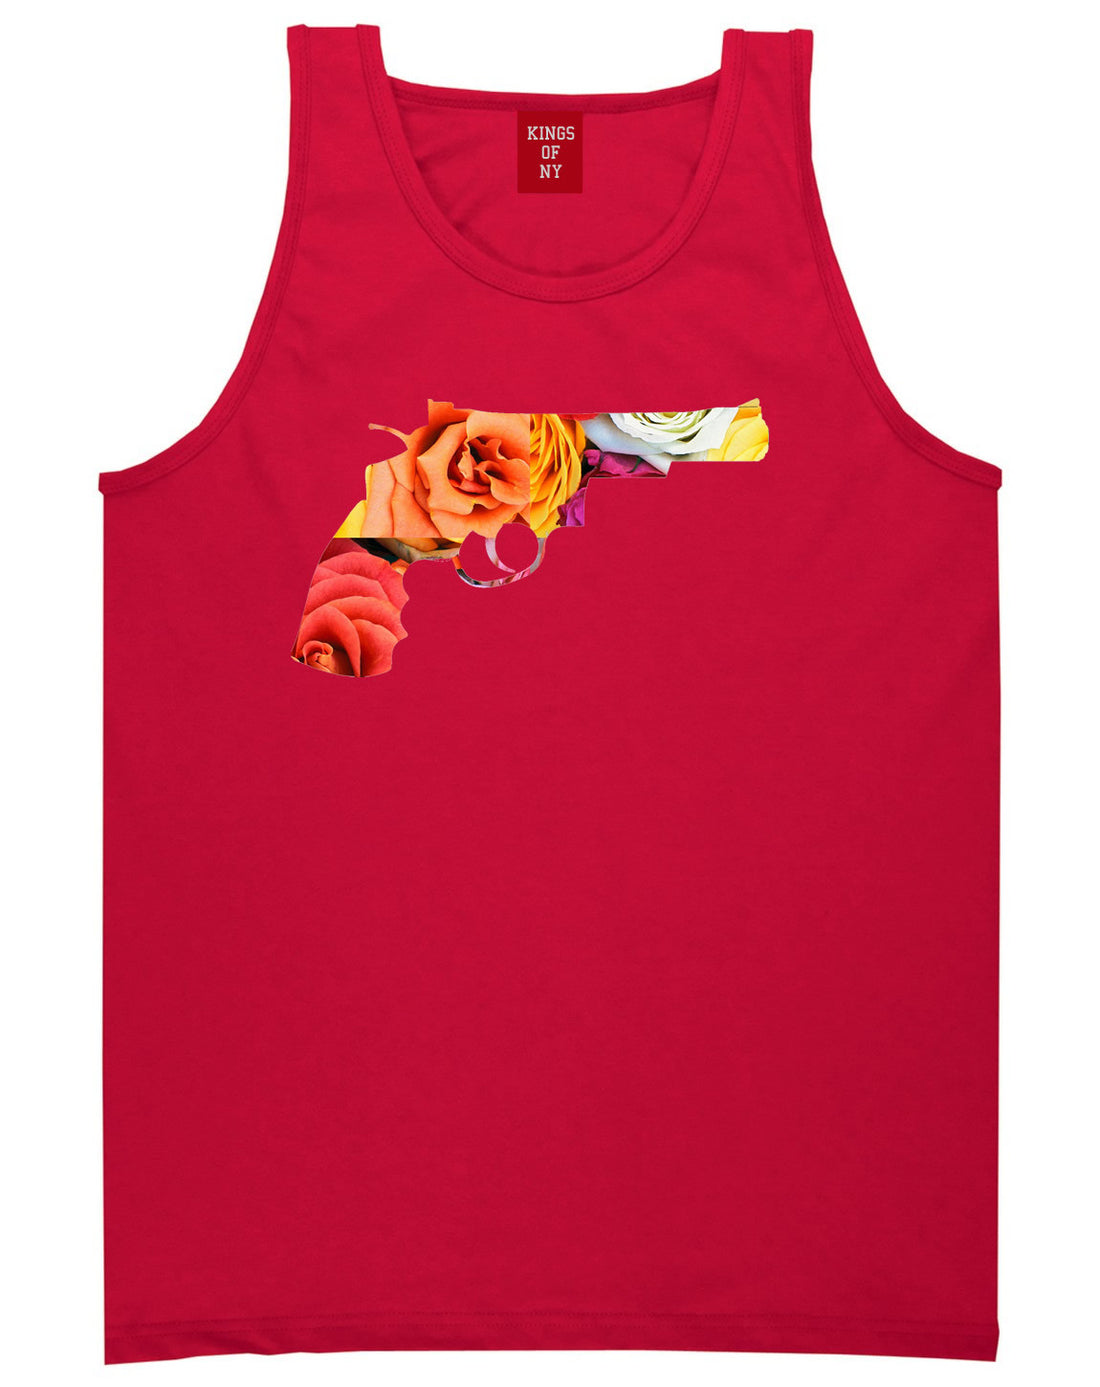 Floral Gun Flower Print Colt 45 Revolver Tank Top In Red by Kings Of NY